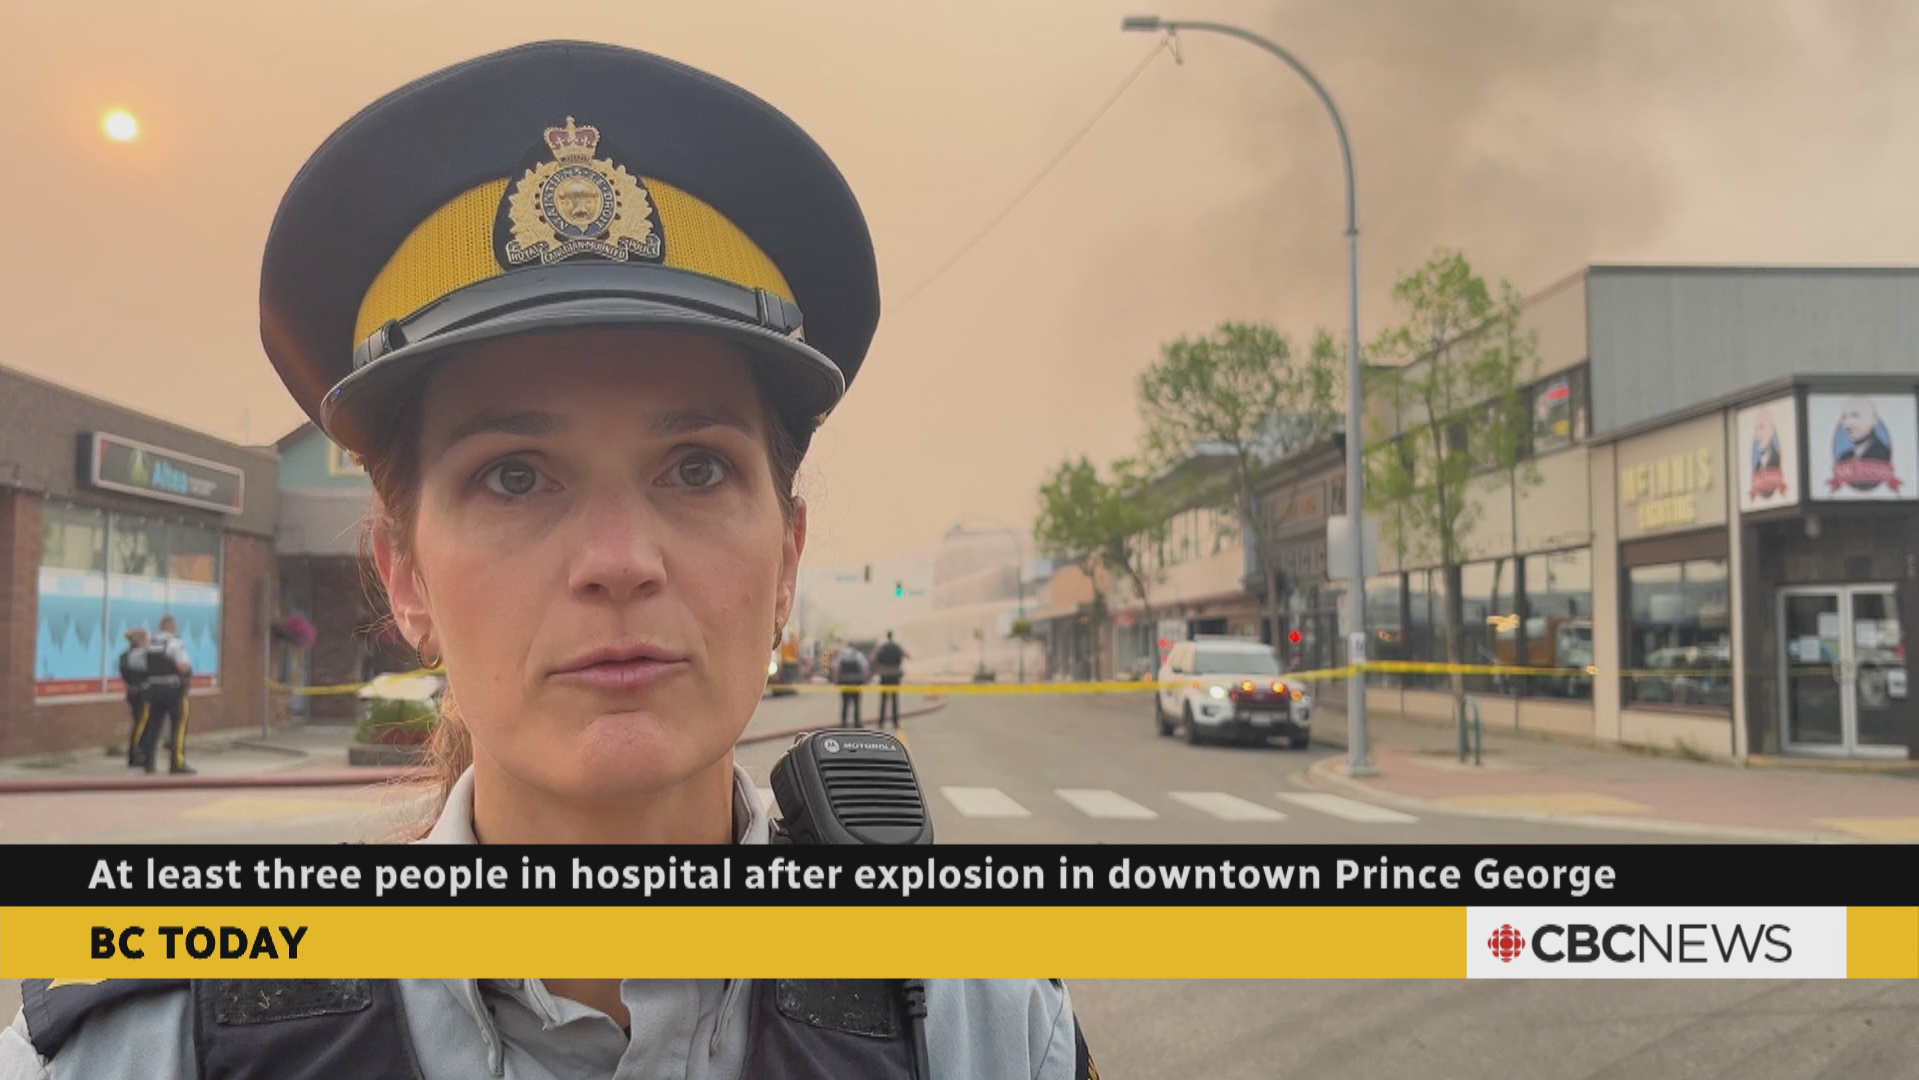 prince george explosion victim in critical care rcmp say cause is likely suspicious